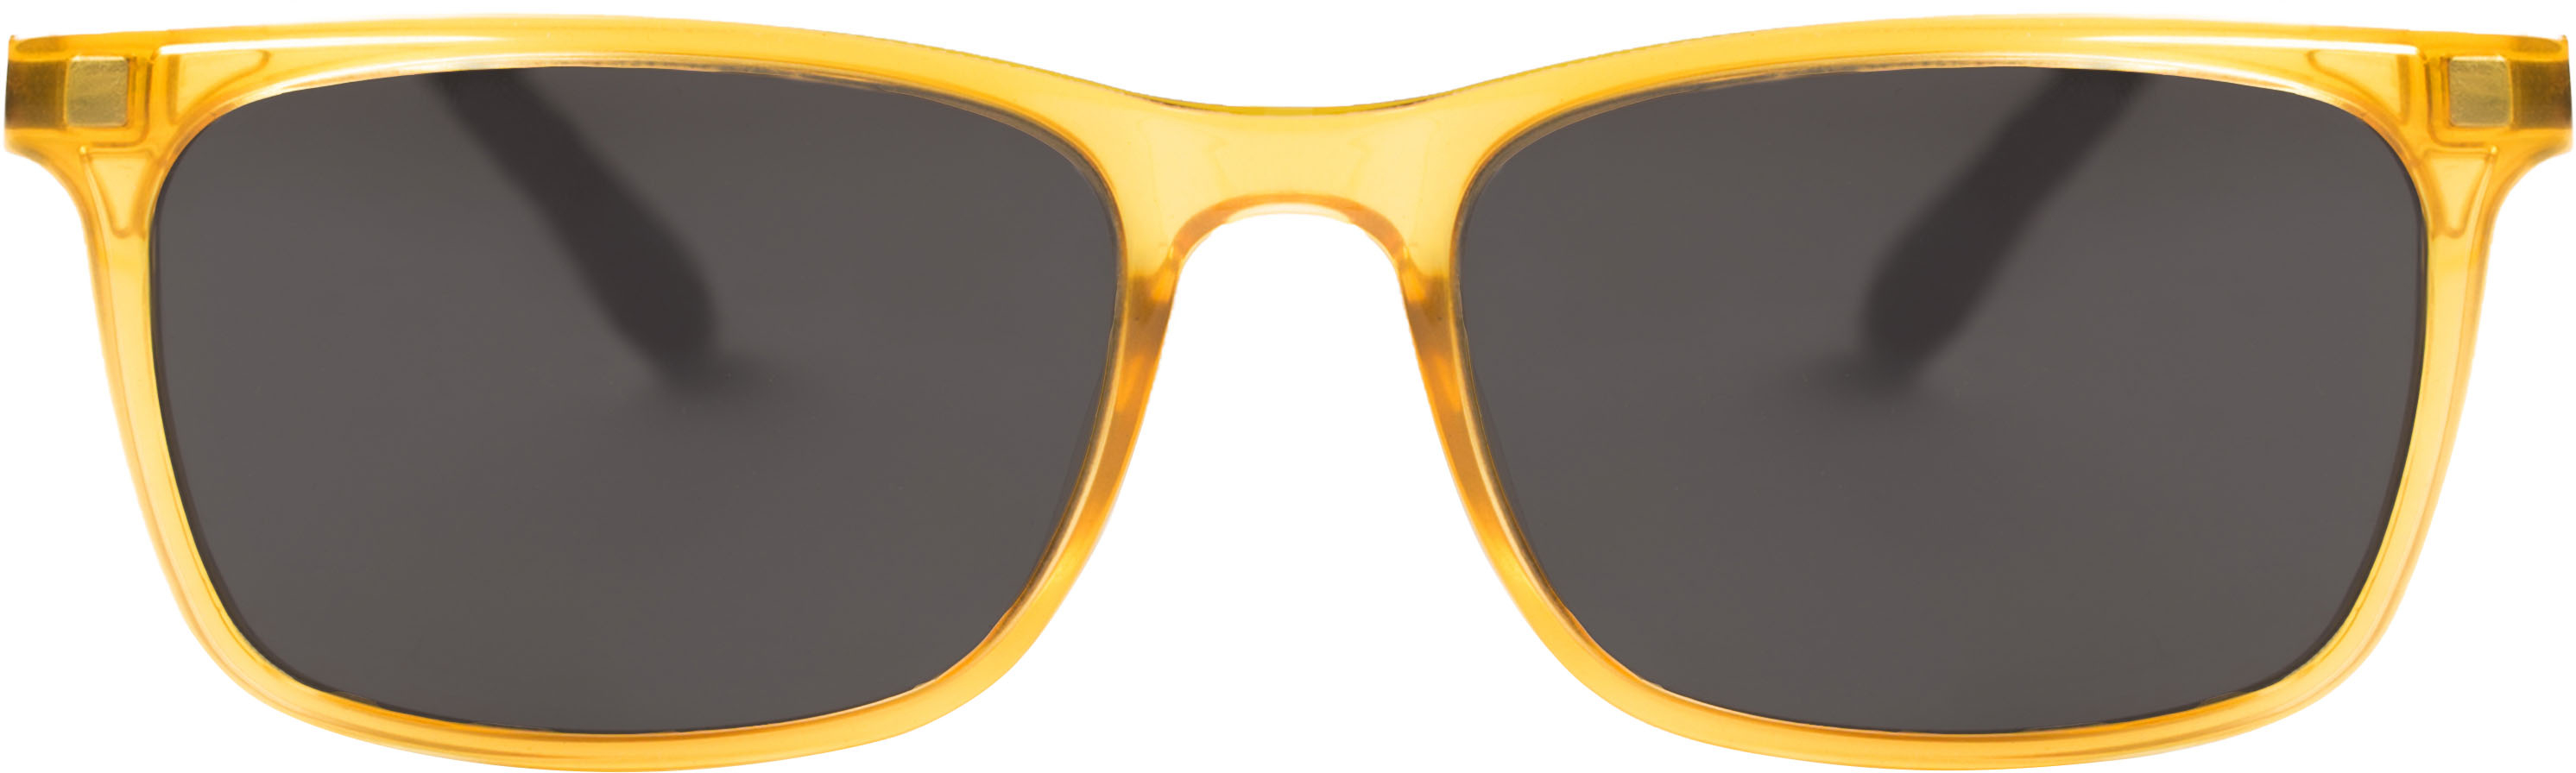 Angle View: Wavebalance - BlueDuo, Cruise, Blue Light Reducing Glasses with Magnetic Sunglass Clip-On- Honey - Yellow